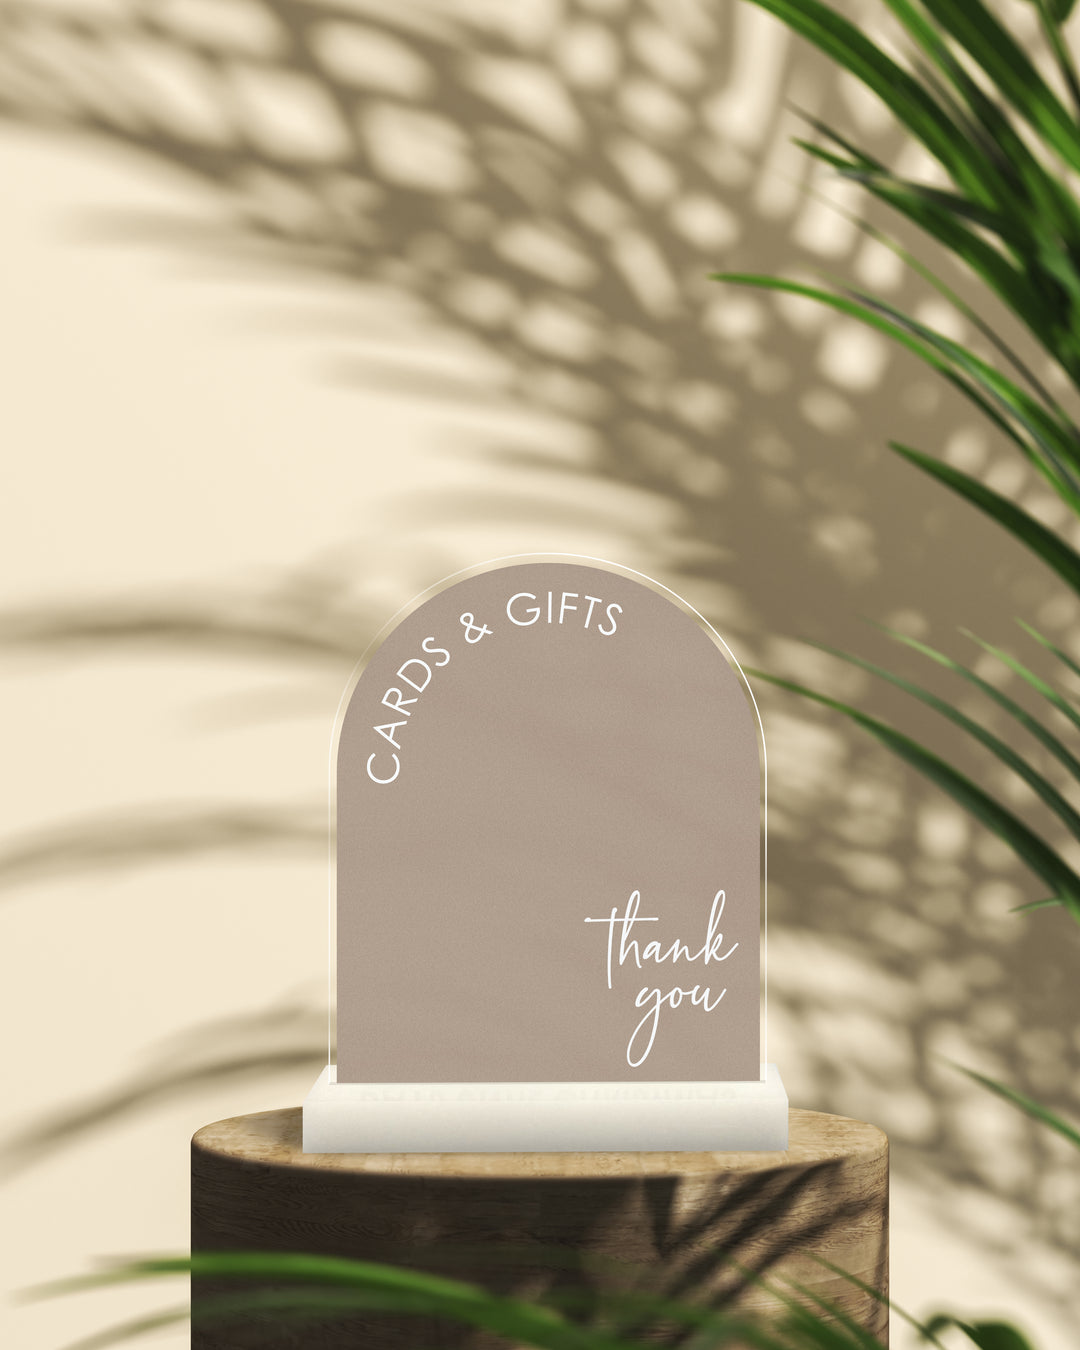 Arch "Cards & Gifts" Sign with Colored Background